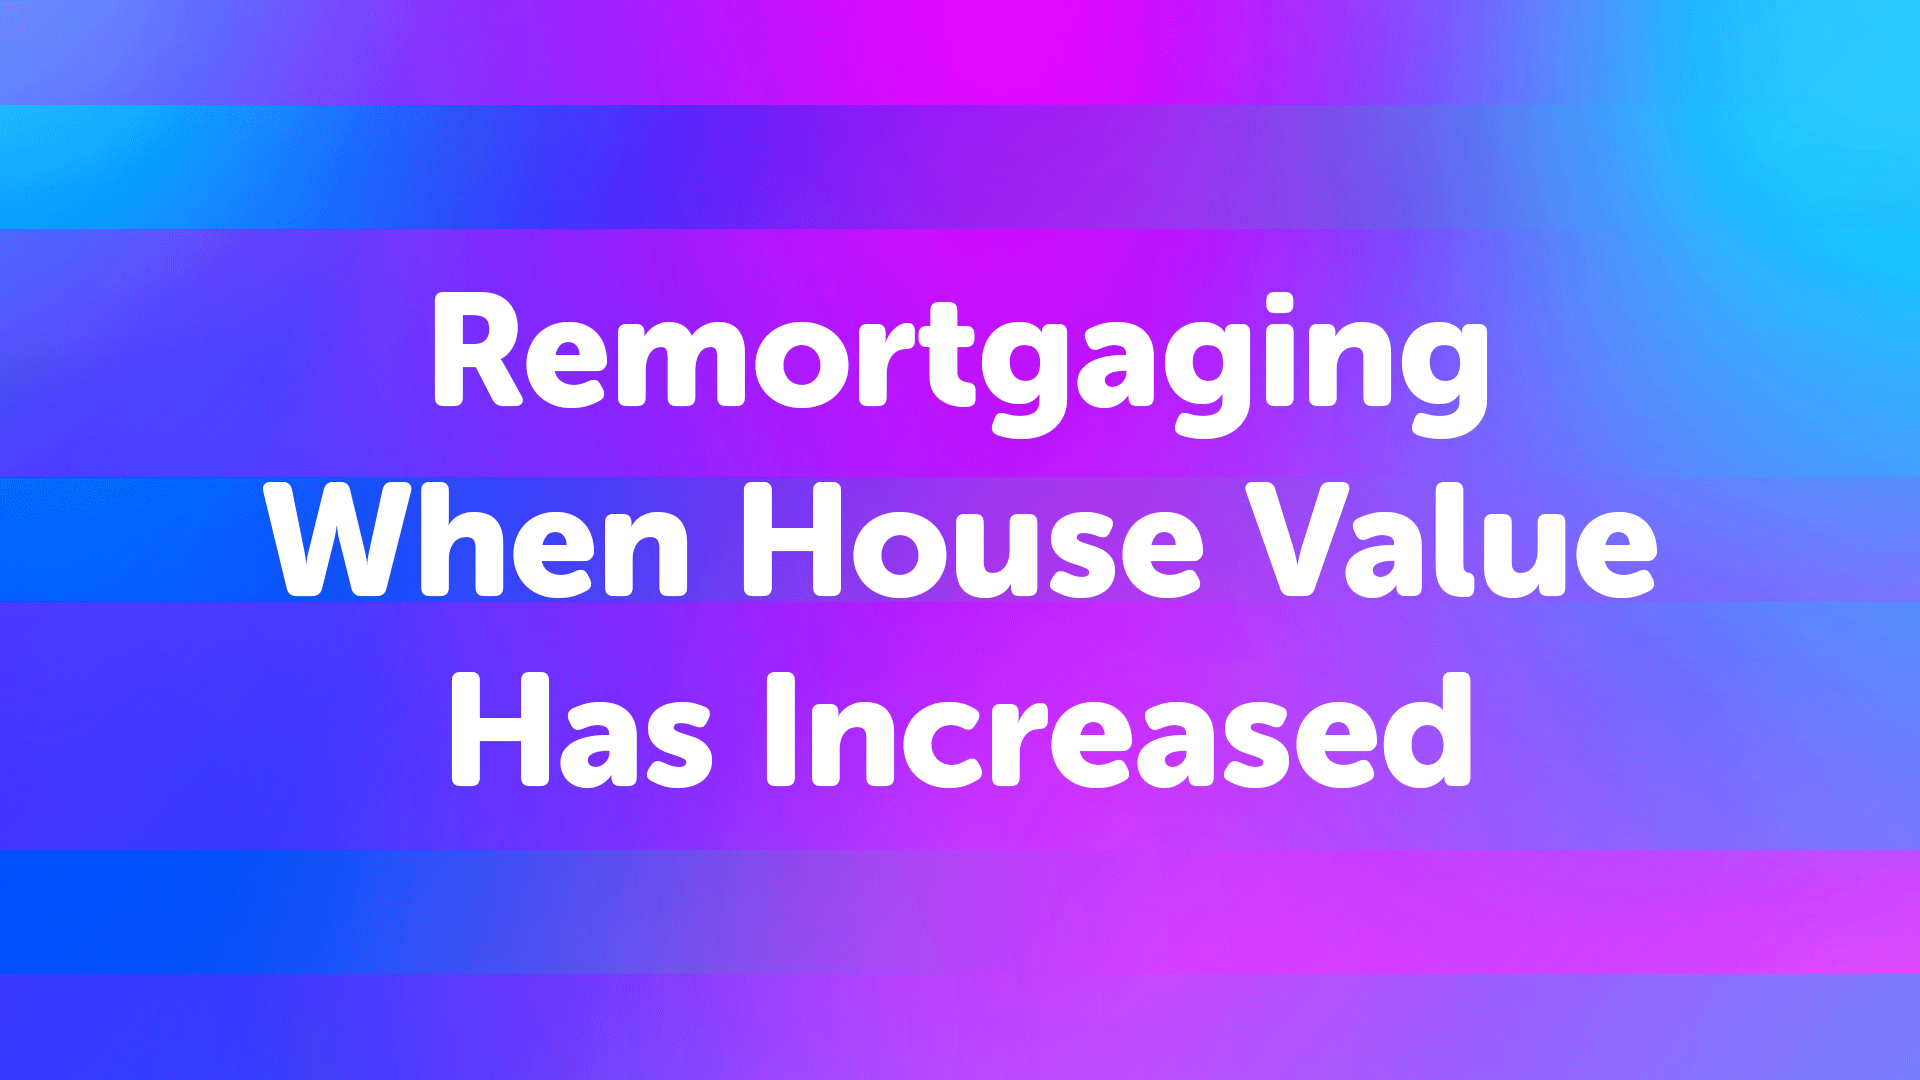 Remortgaging When House Value Has Increased in Coventry